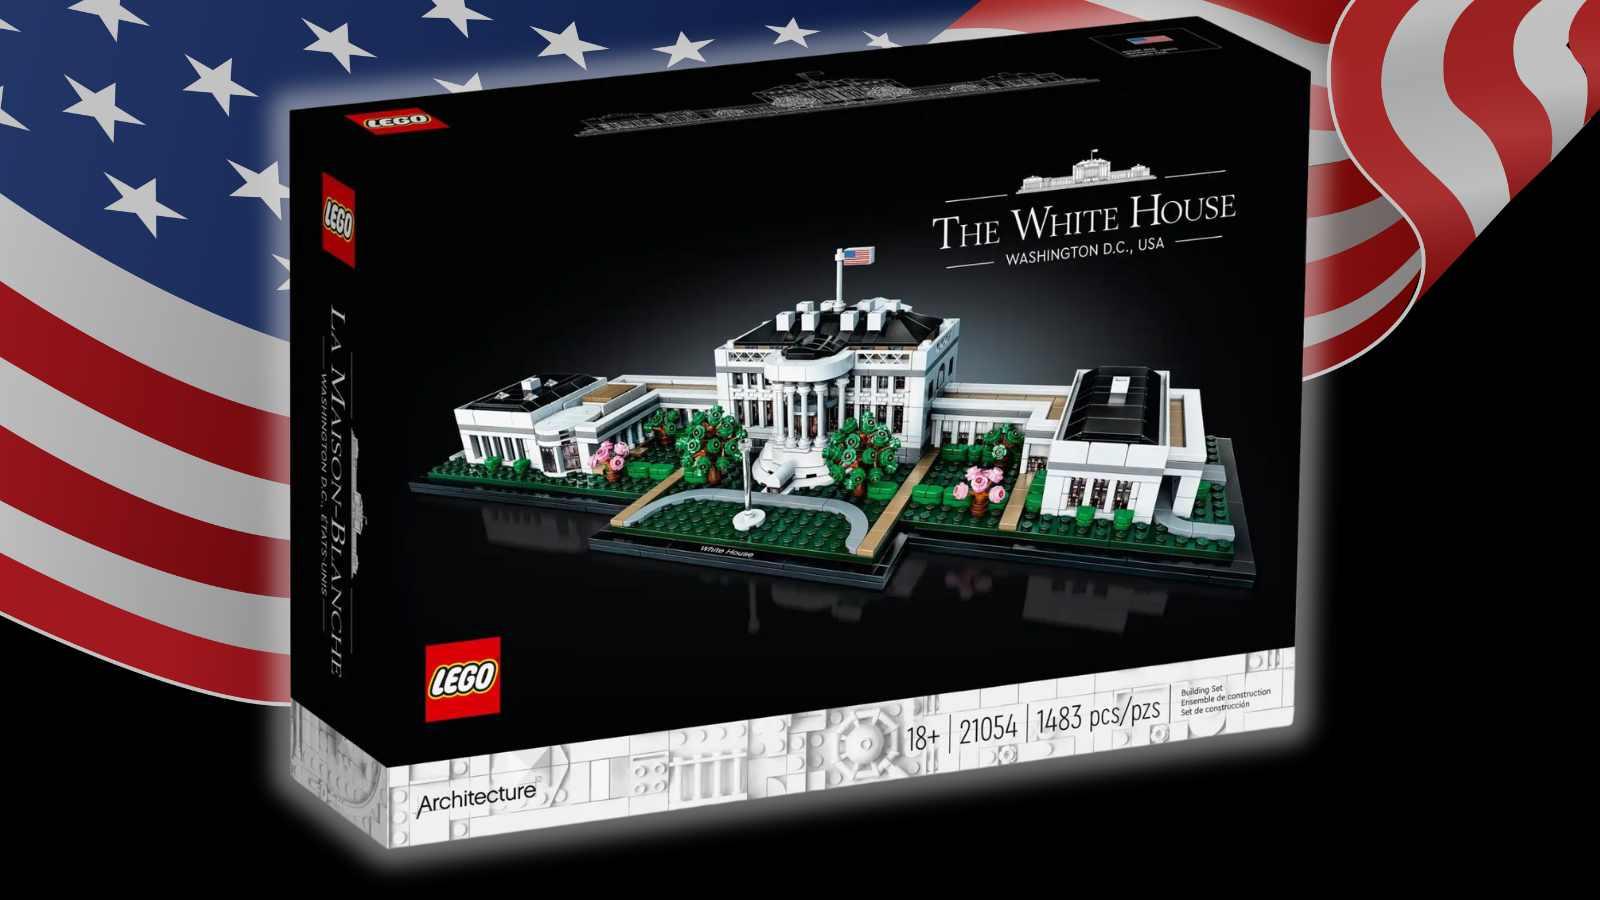 The LEGO Architecture The White House set box on a black background with the American flag.